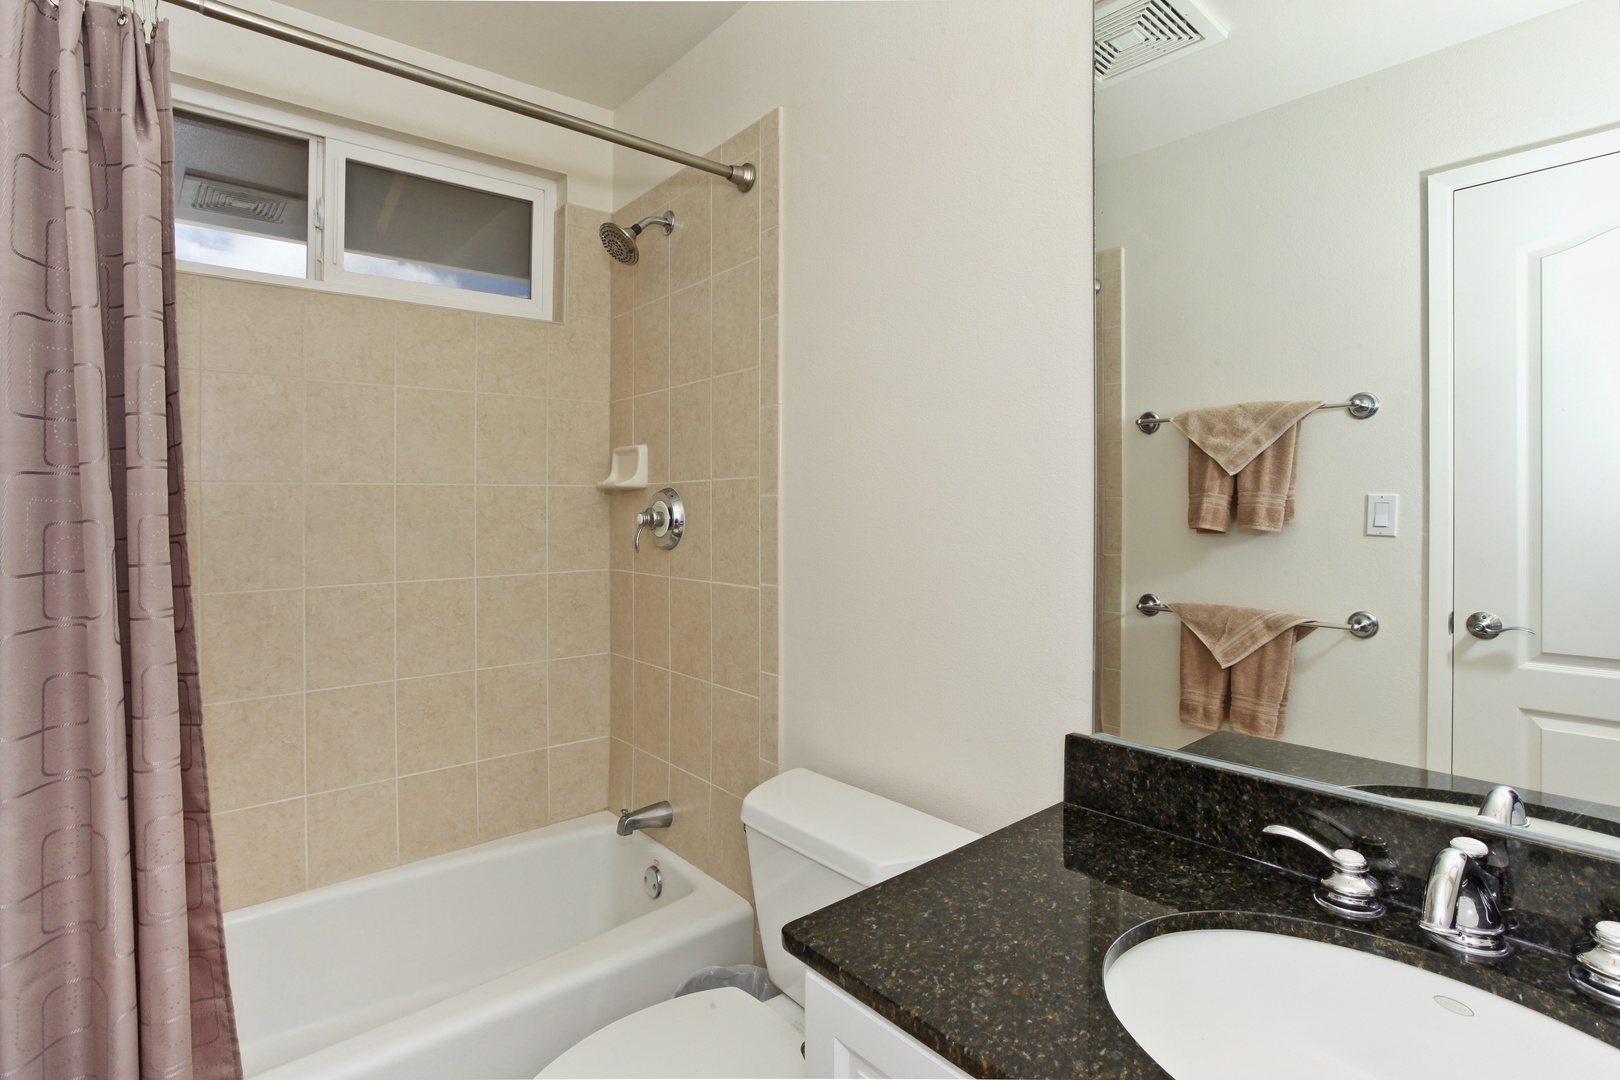 Kapolei Vacation Rentals, Ko Olina Kai Estate #20 - The second guest bathroom with a bathtub and shower.